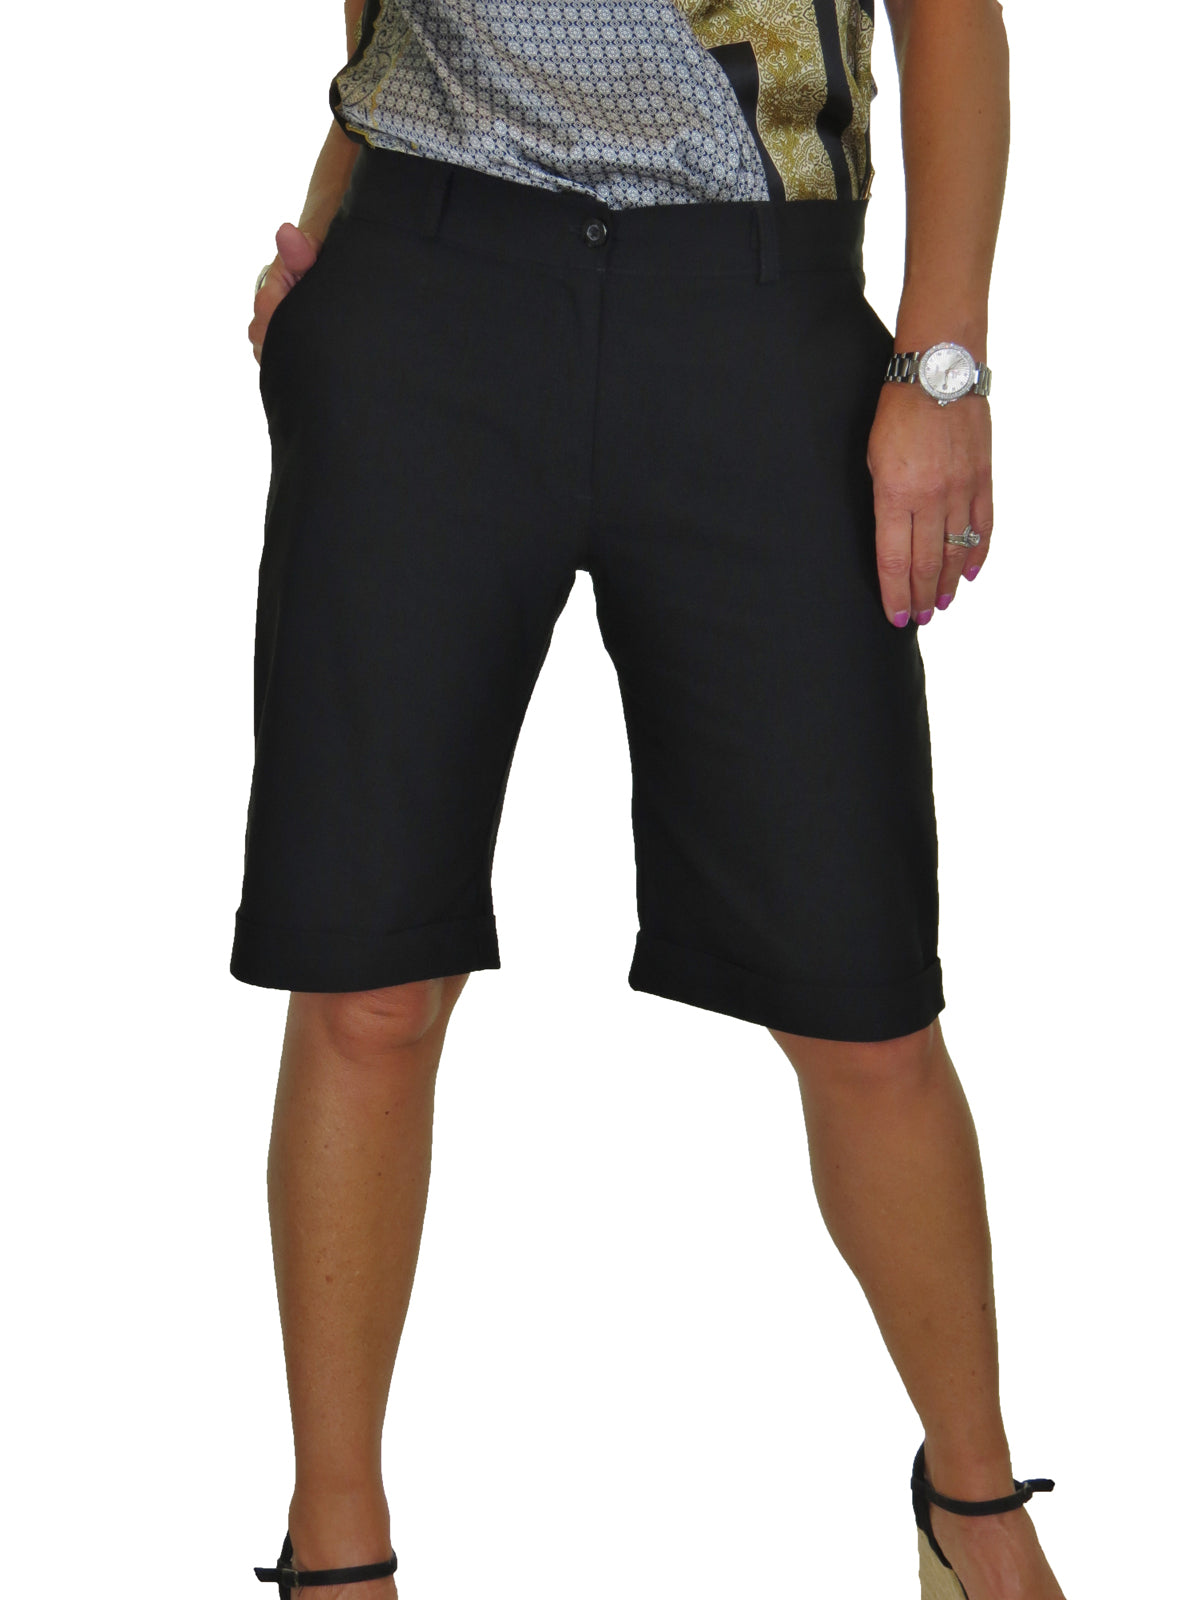 Ladies Above The Knee Stretch Shorts Black